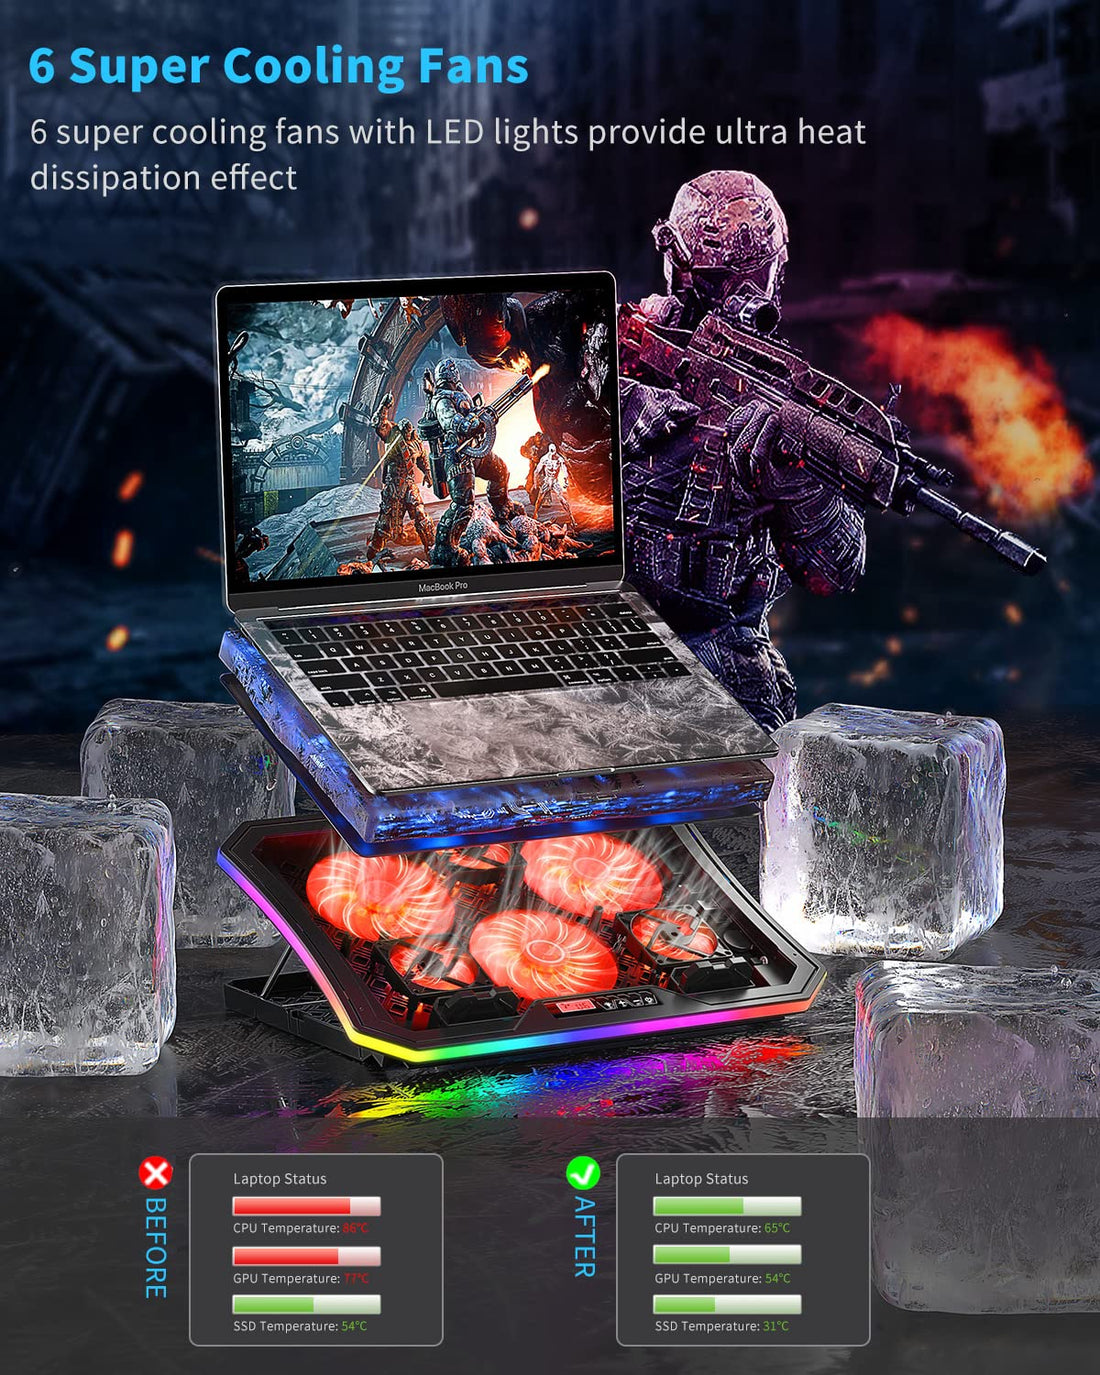 2022 Upgrade Laptop Cooling Pad, KeiBn RGB Lights Laptop Cooler 6 Fans for 15.6-17.3 Inch Laptops, 7 Height Stands, 10 Modes Light, 2 USB Ports, Desk or Lap Use (A8,Red)